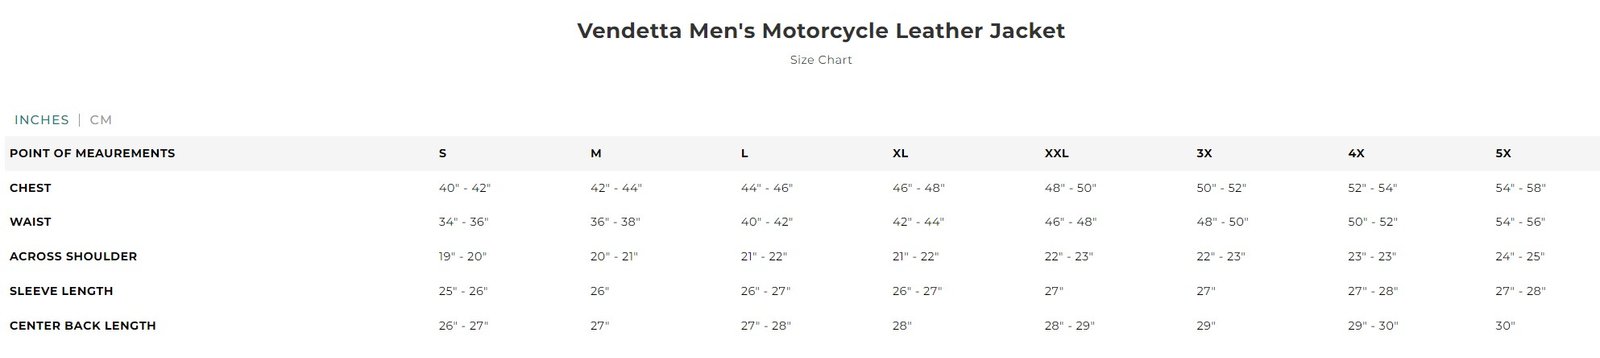 Size chart for Vendetta, men's leather motorcycle jacket.